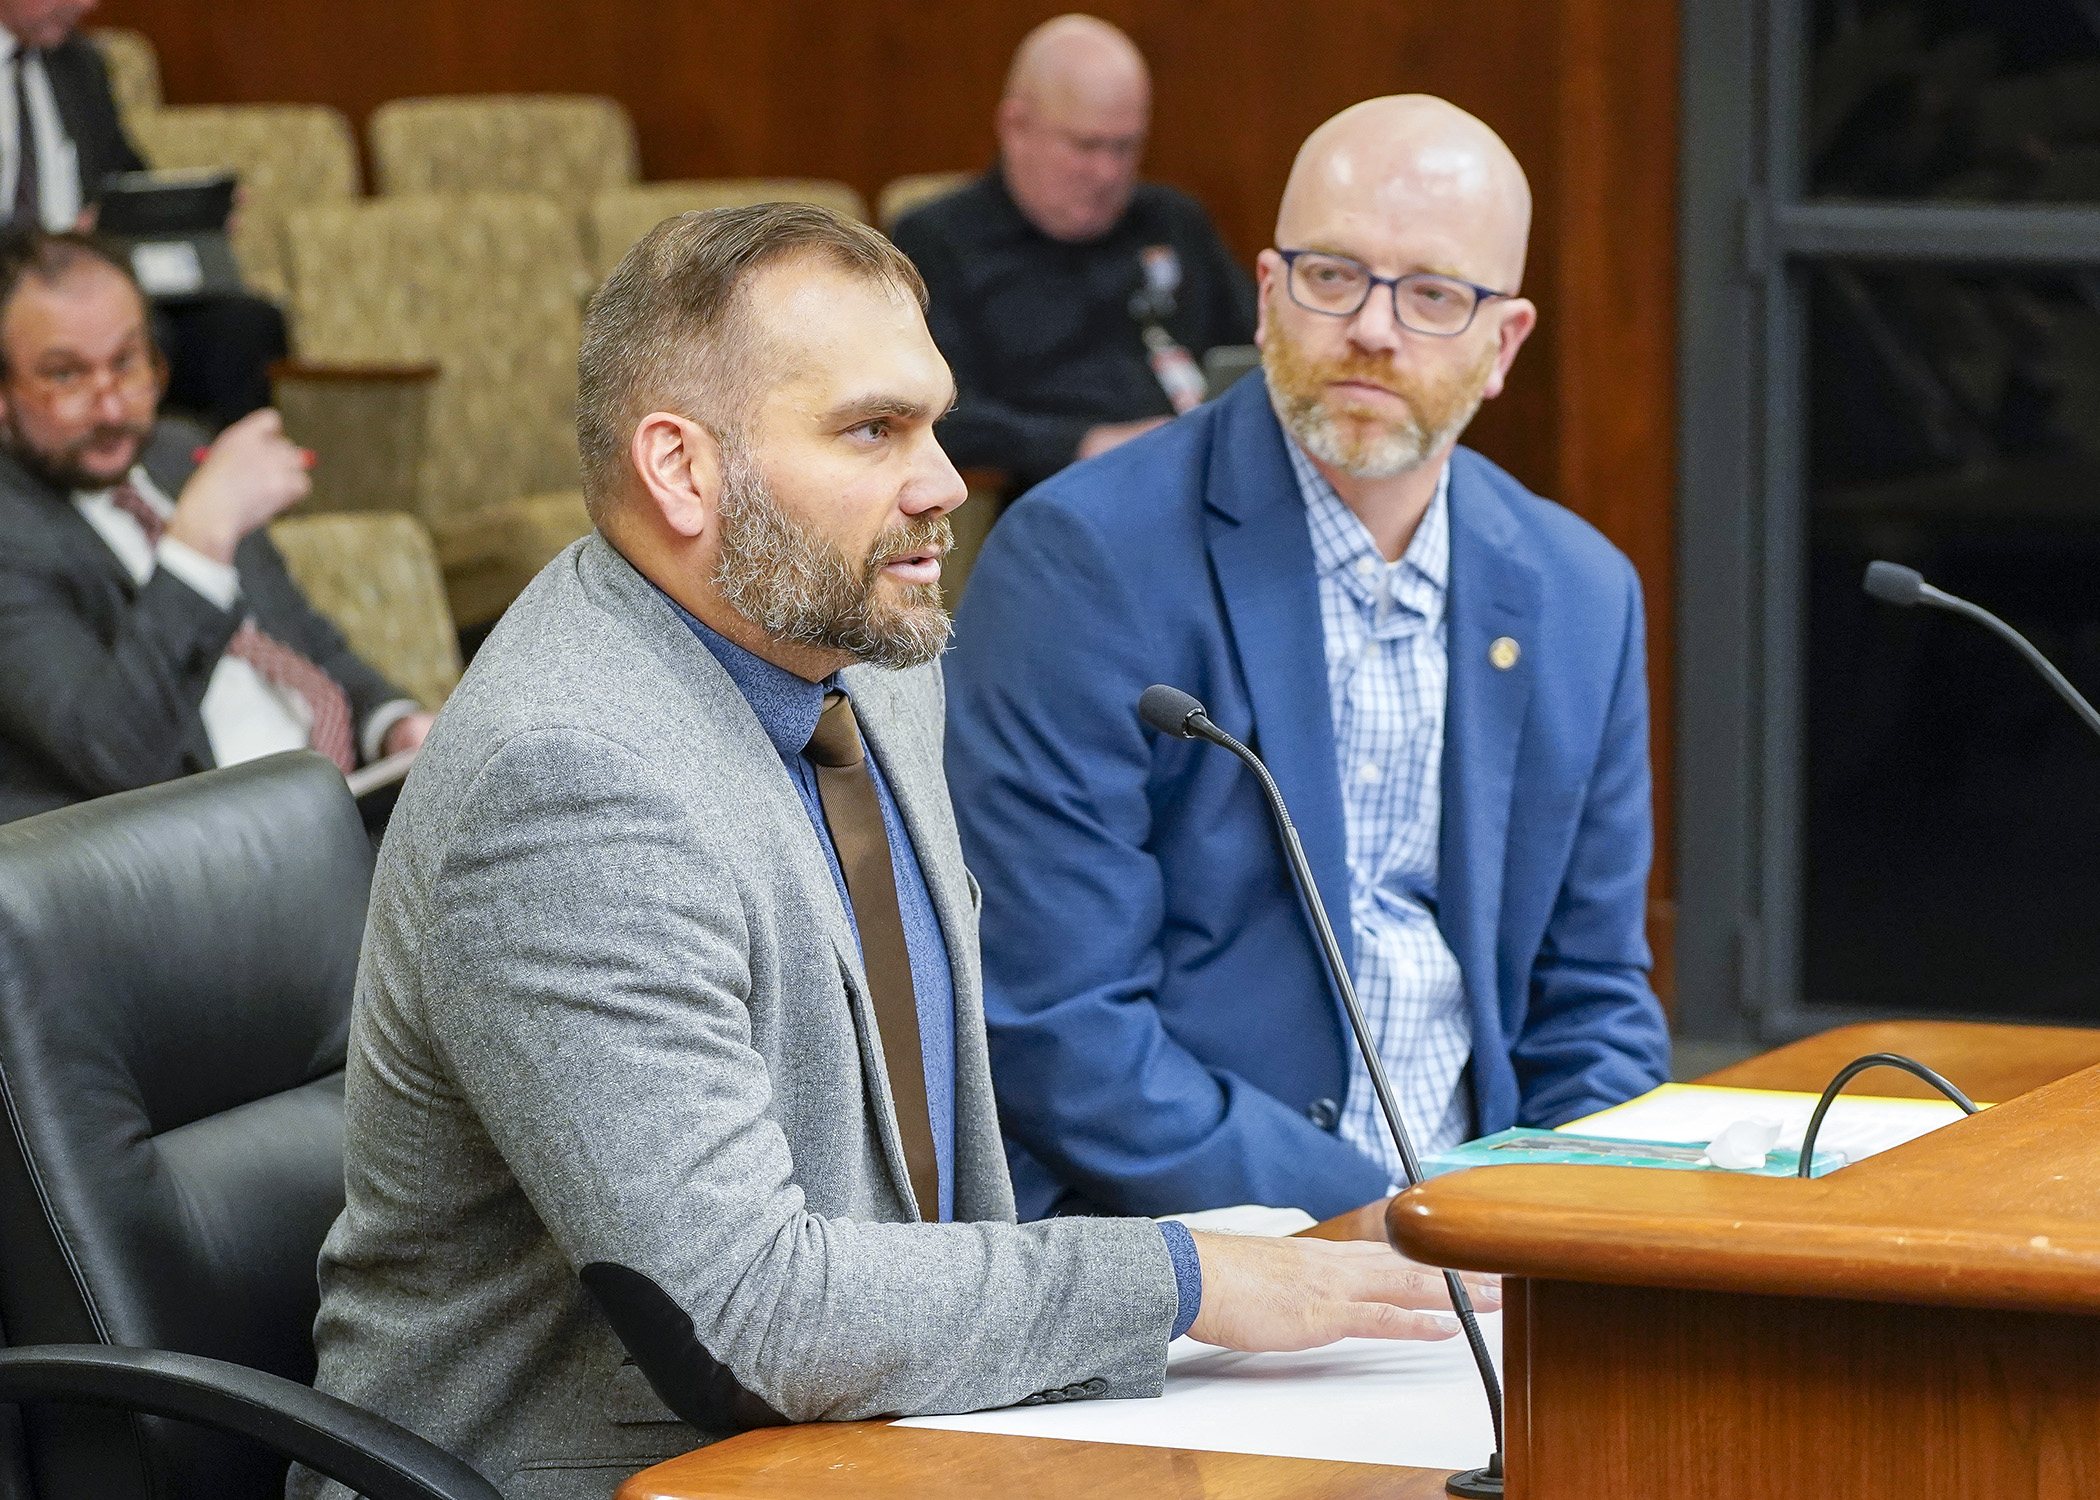 Steve Huser, government relations representative for the City of Minneapolis, testifies before the House Commerce Finance and Policy Committee in support of a bill that’d require motor vehicle manufacturers to offer antitheft protection devices on vehicles. Rep. Brad Tabke, right, is the bill sponsor. (Photo by Andrew VonBank)